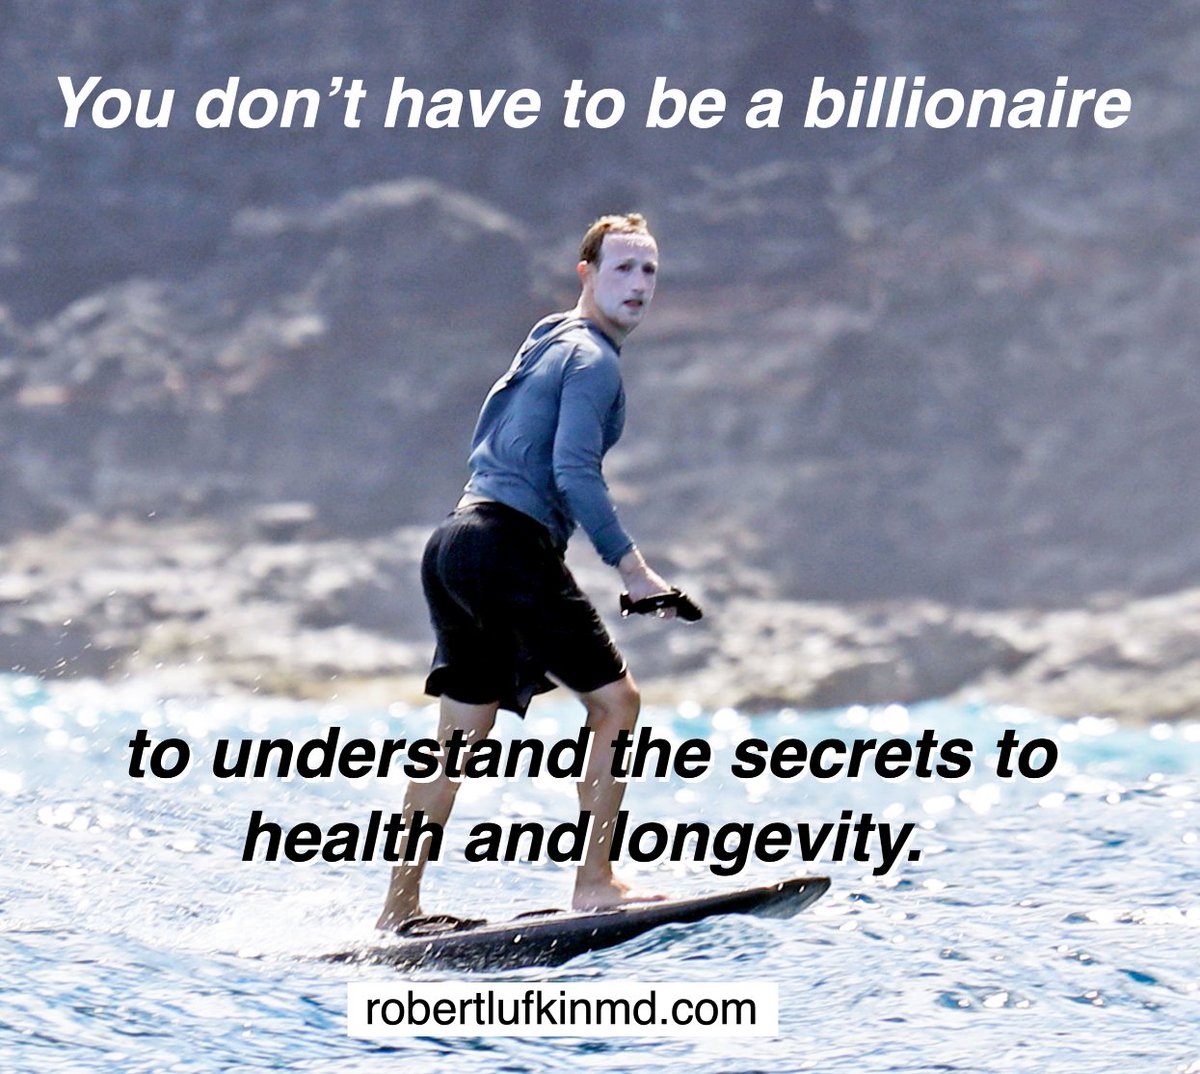 You don't have to be a billionaire to understand the secrets to health and longevity. Find out in my new book, 'Lies I Taught in Medical School' Download a free sample chapter or pre-order here: robertlufkinmd.com/lies/